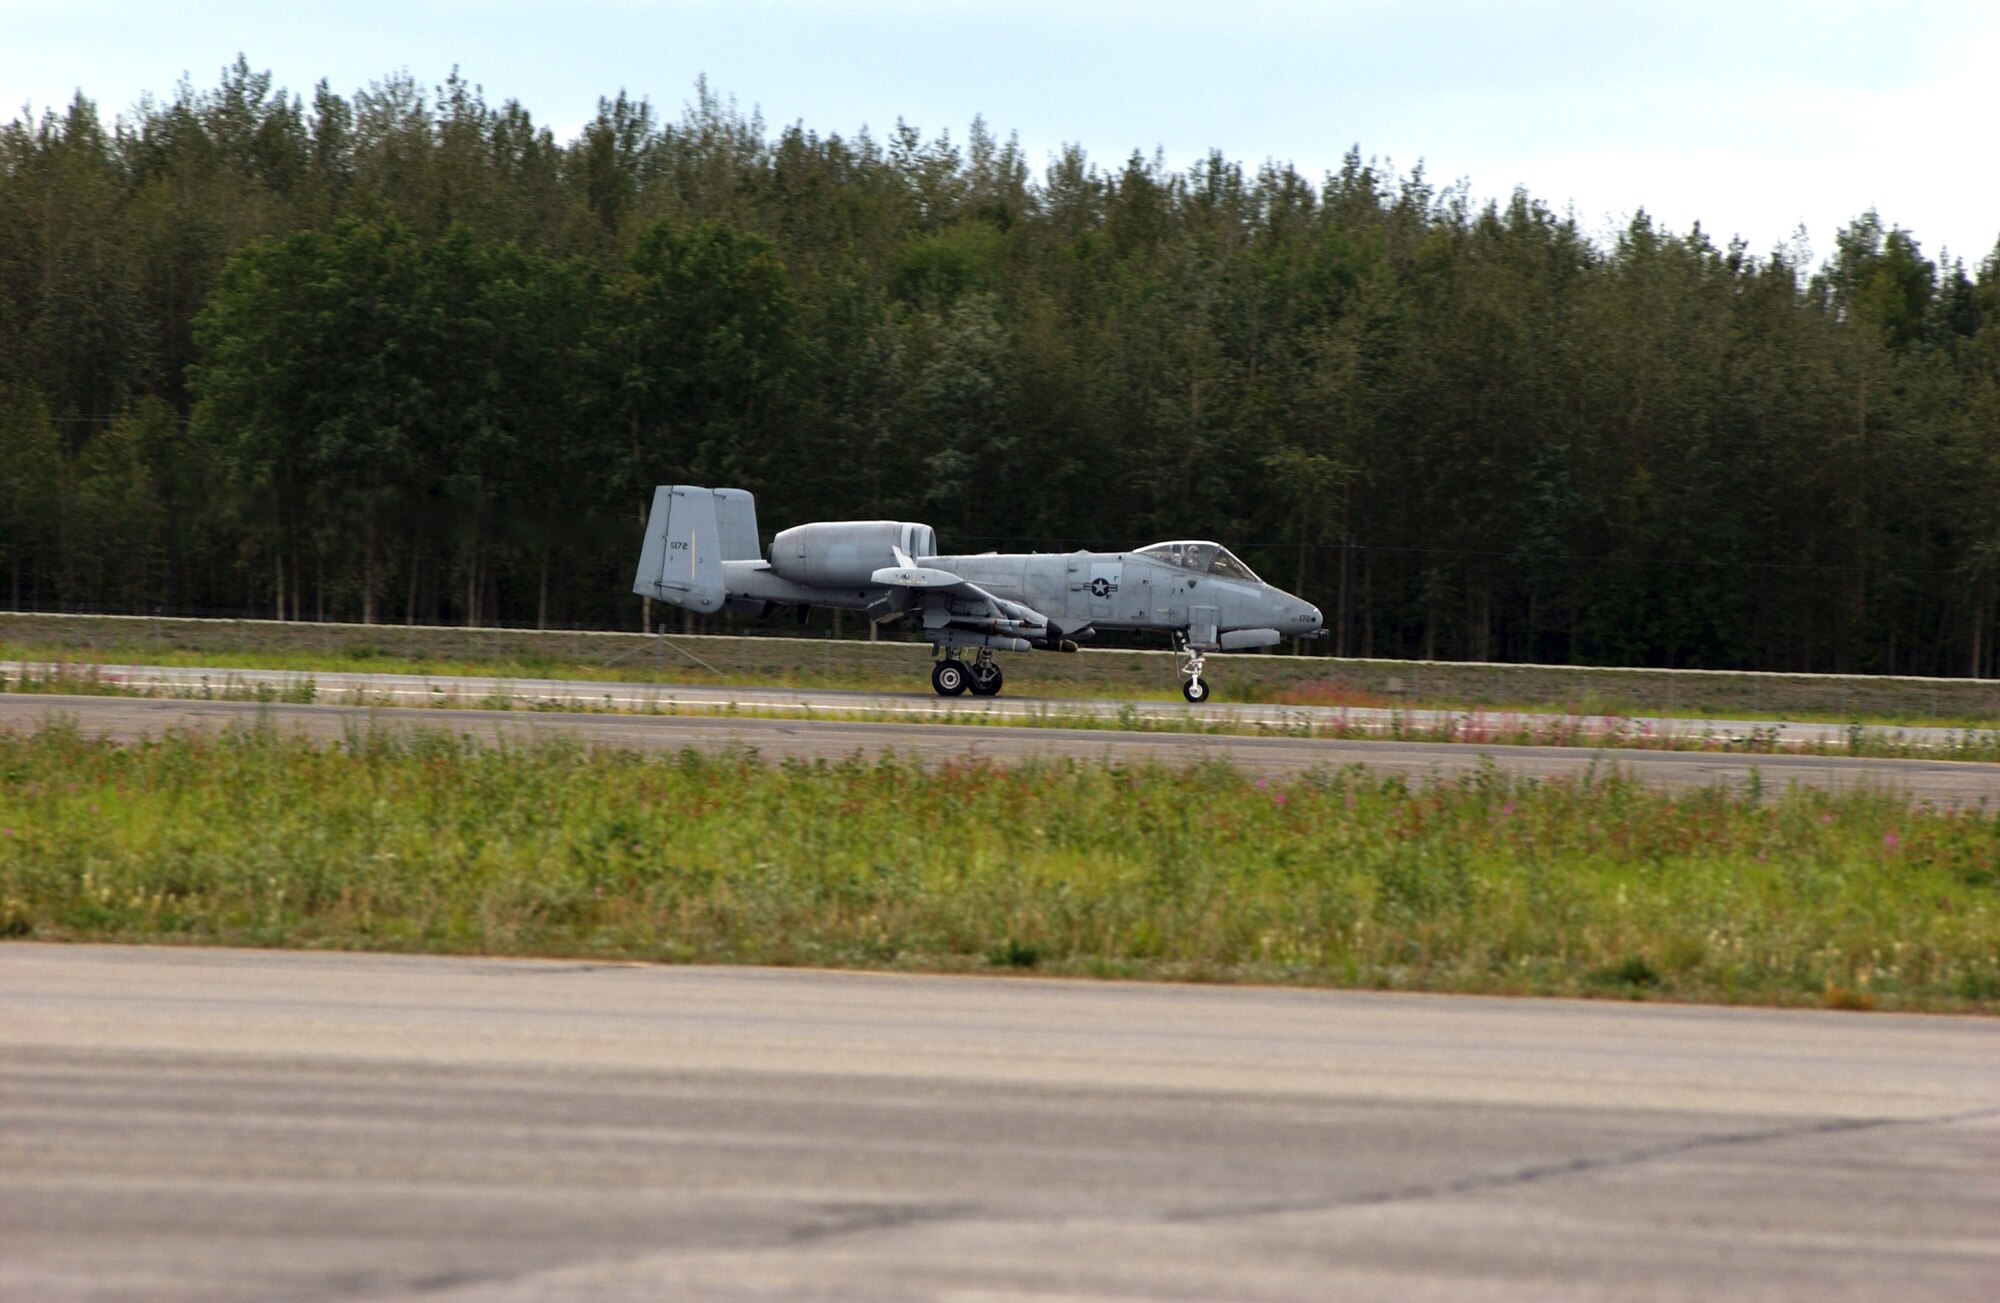 An A-10 Thunderbolt II from the 355th Fighter Squadron lands after the last flight at Eielson Air Force Base, Alaska, July 31. The first two A-10s arrived at Eielson Dec. 18, 1981; the last two A-10s are set to leave Aug. 15 for Moody AFB, Ga., and Gowen Field, Idaho. (U.S. Air Force photo/Airman 1st Class Jonathan Snyder) 
